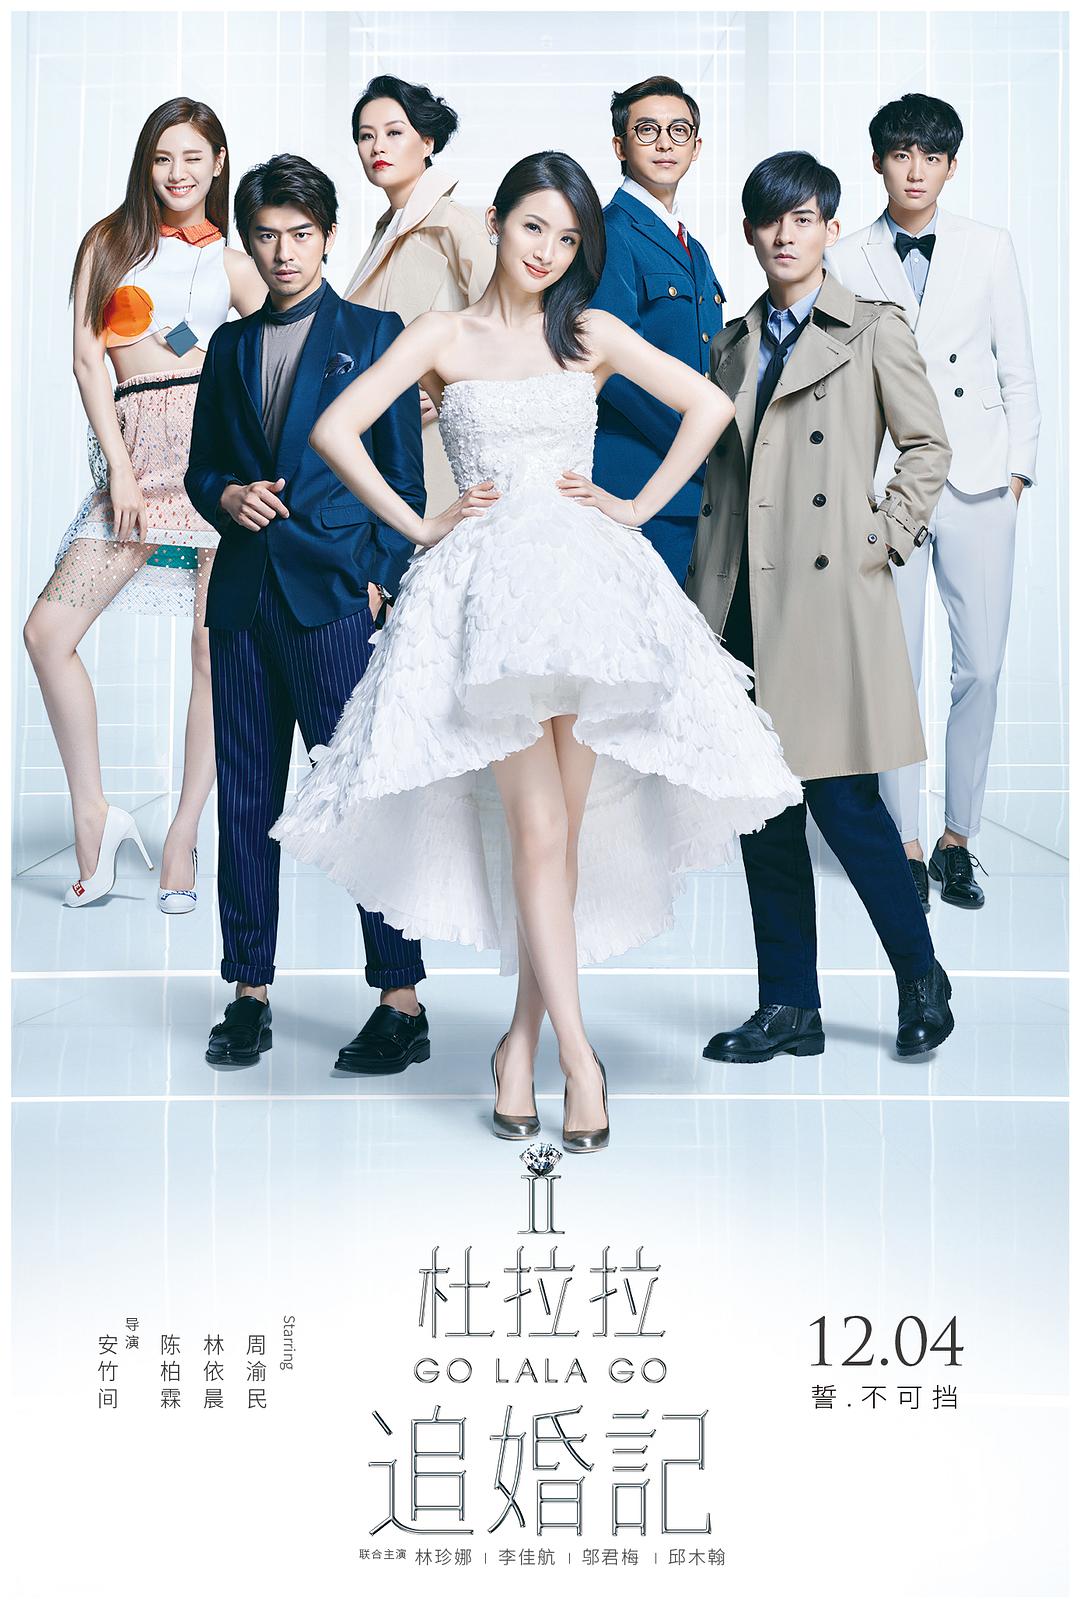 ׷ Go.Lala.Go.2.2015.CHINESE.1080p.BluRay.x264.DTS-EPiC 6.63GB-1.png